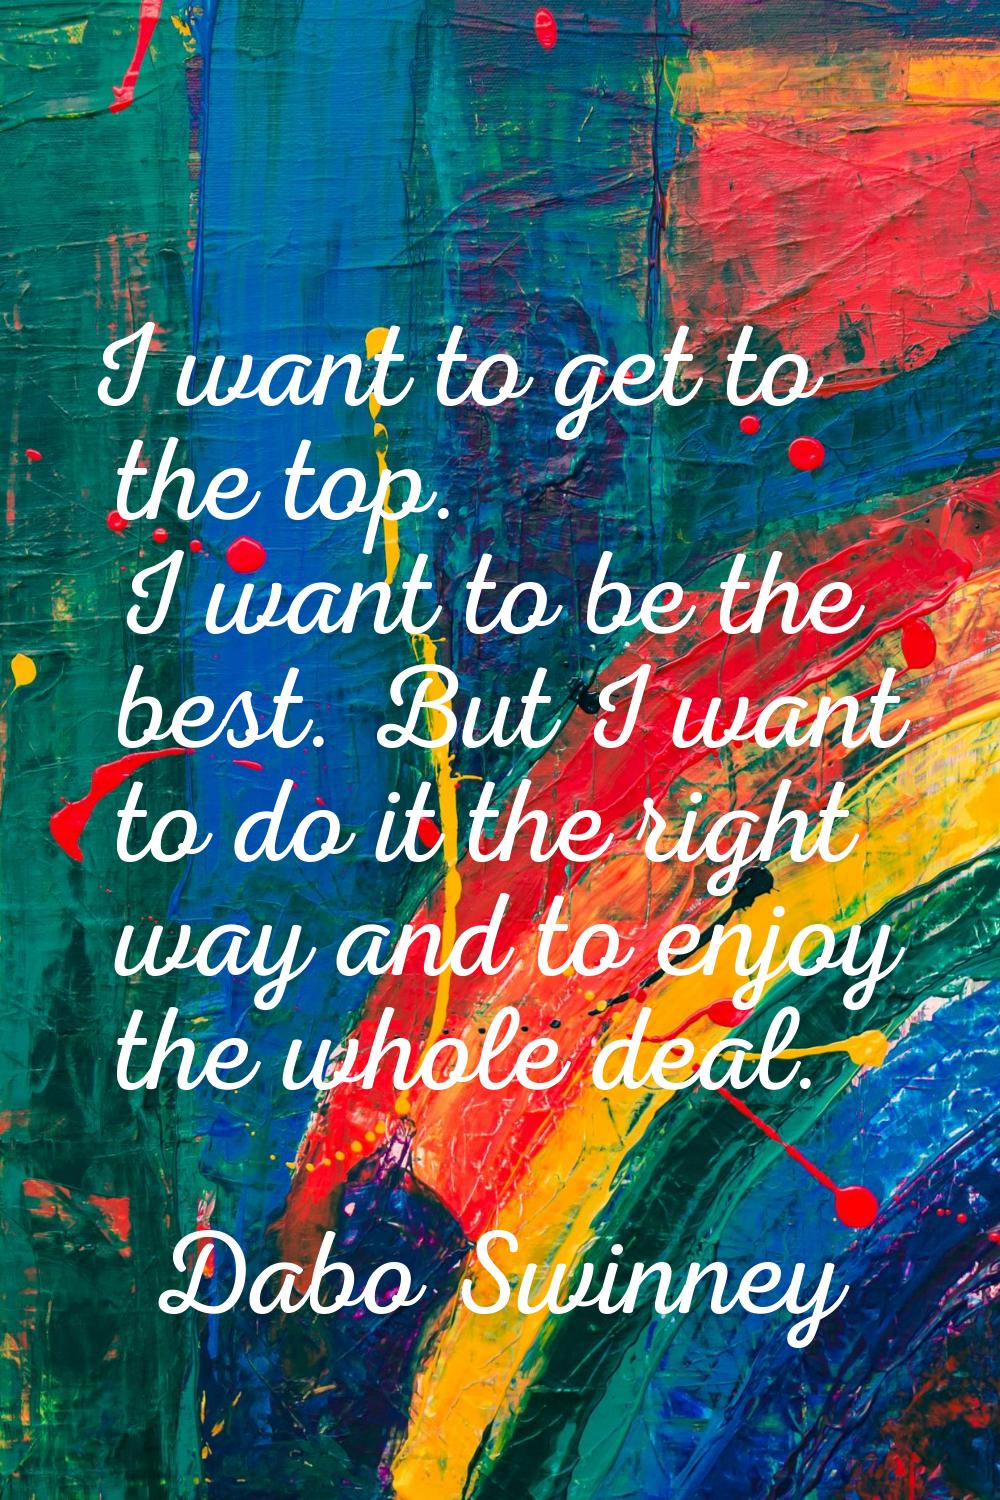 I want to get to the top. I want to be the best. But I want to do it the right way and to enjoy the